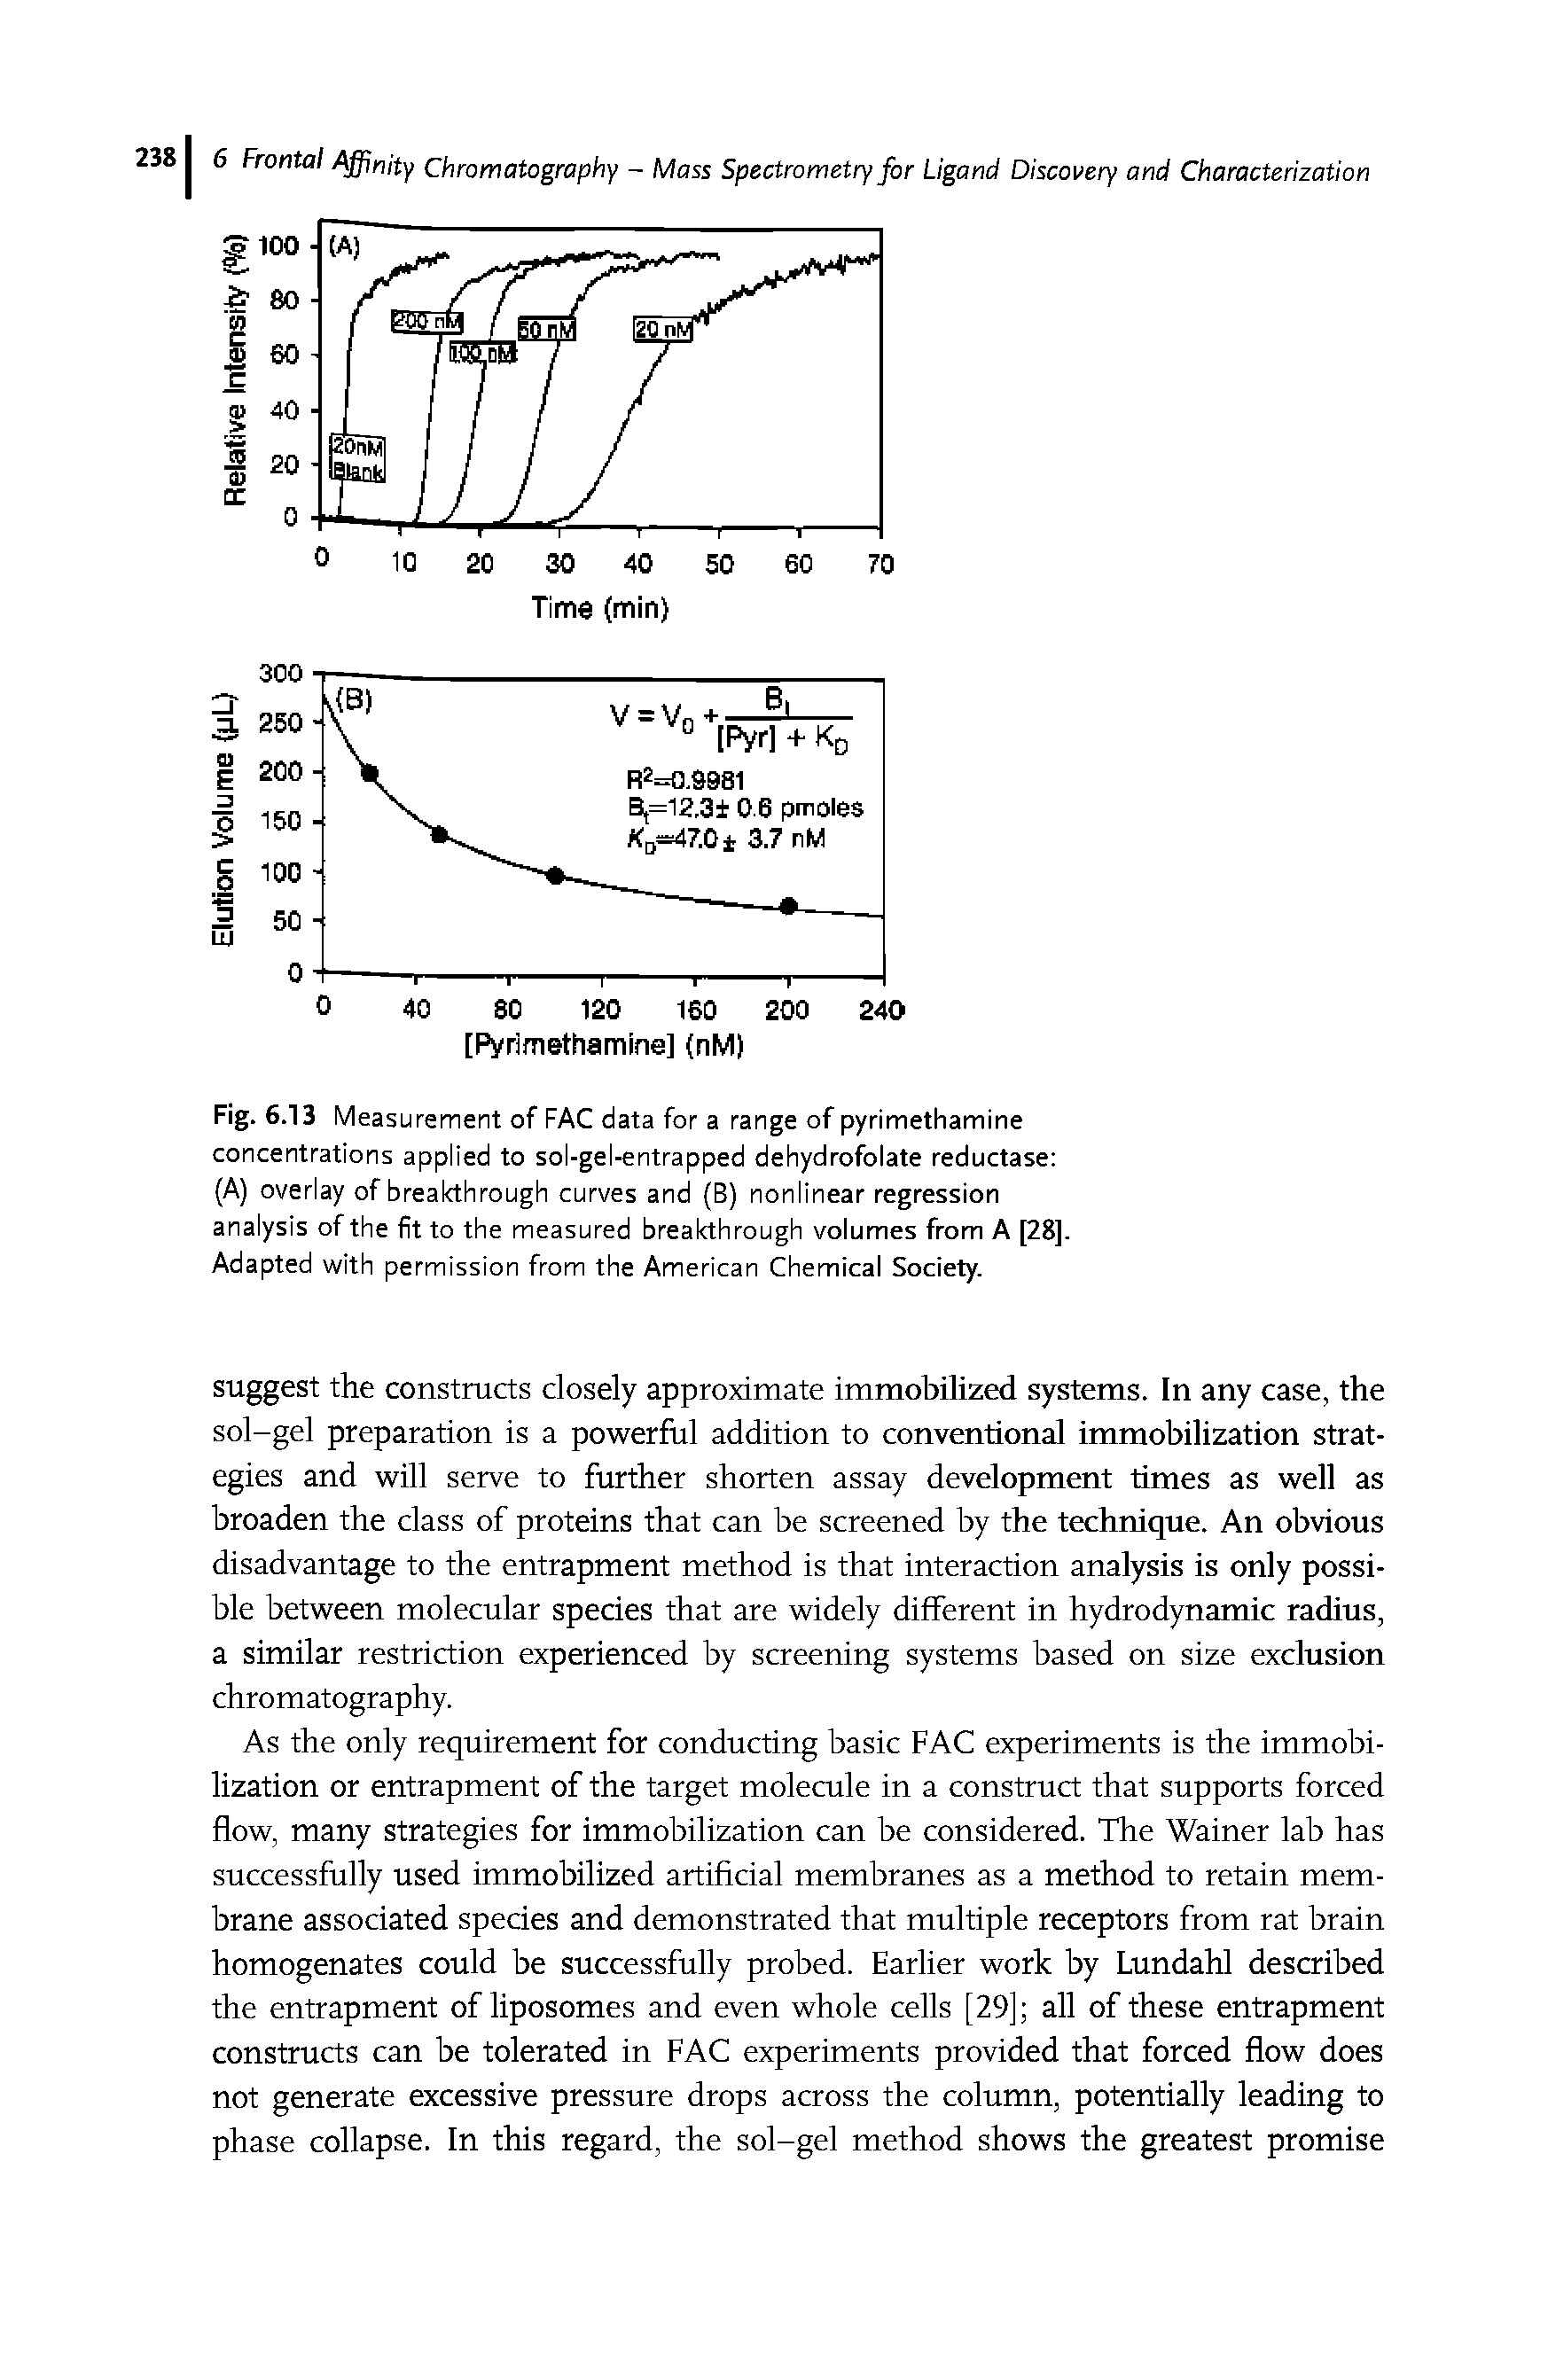 Fig. 6.13 Measurement of FAC data for a range of pyrimethamine concentrations applied to sol-gel-entrapped dehydrofolate reductase (A) overlay of breakthrough curves and (B) nonlinear regression analysis of the fit to the measured breakthrough volumes from A [28]. Adapted with permission from the American Chemical Society.